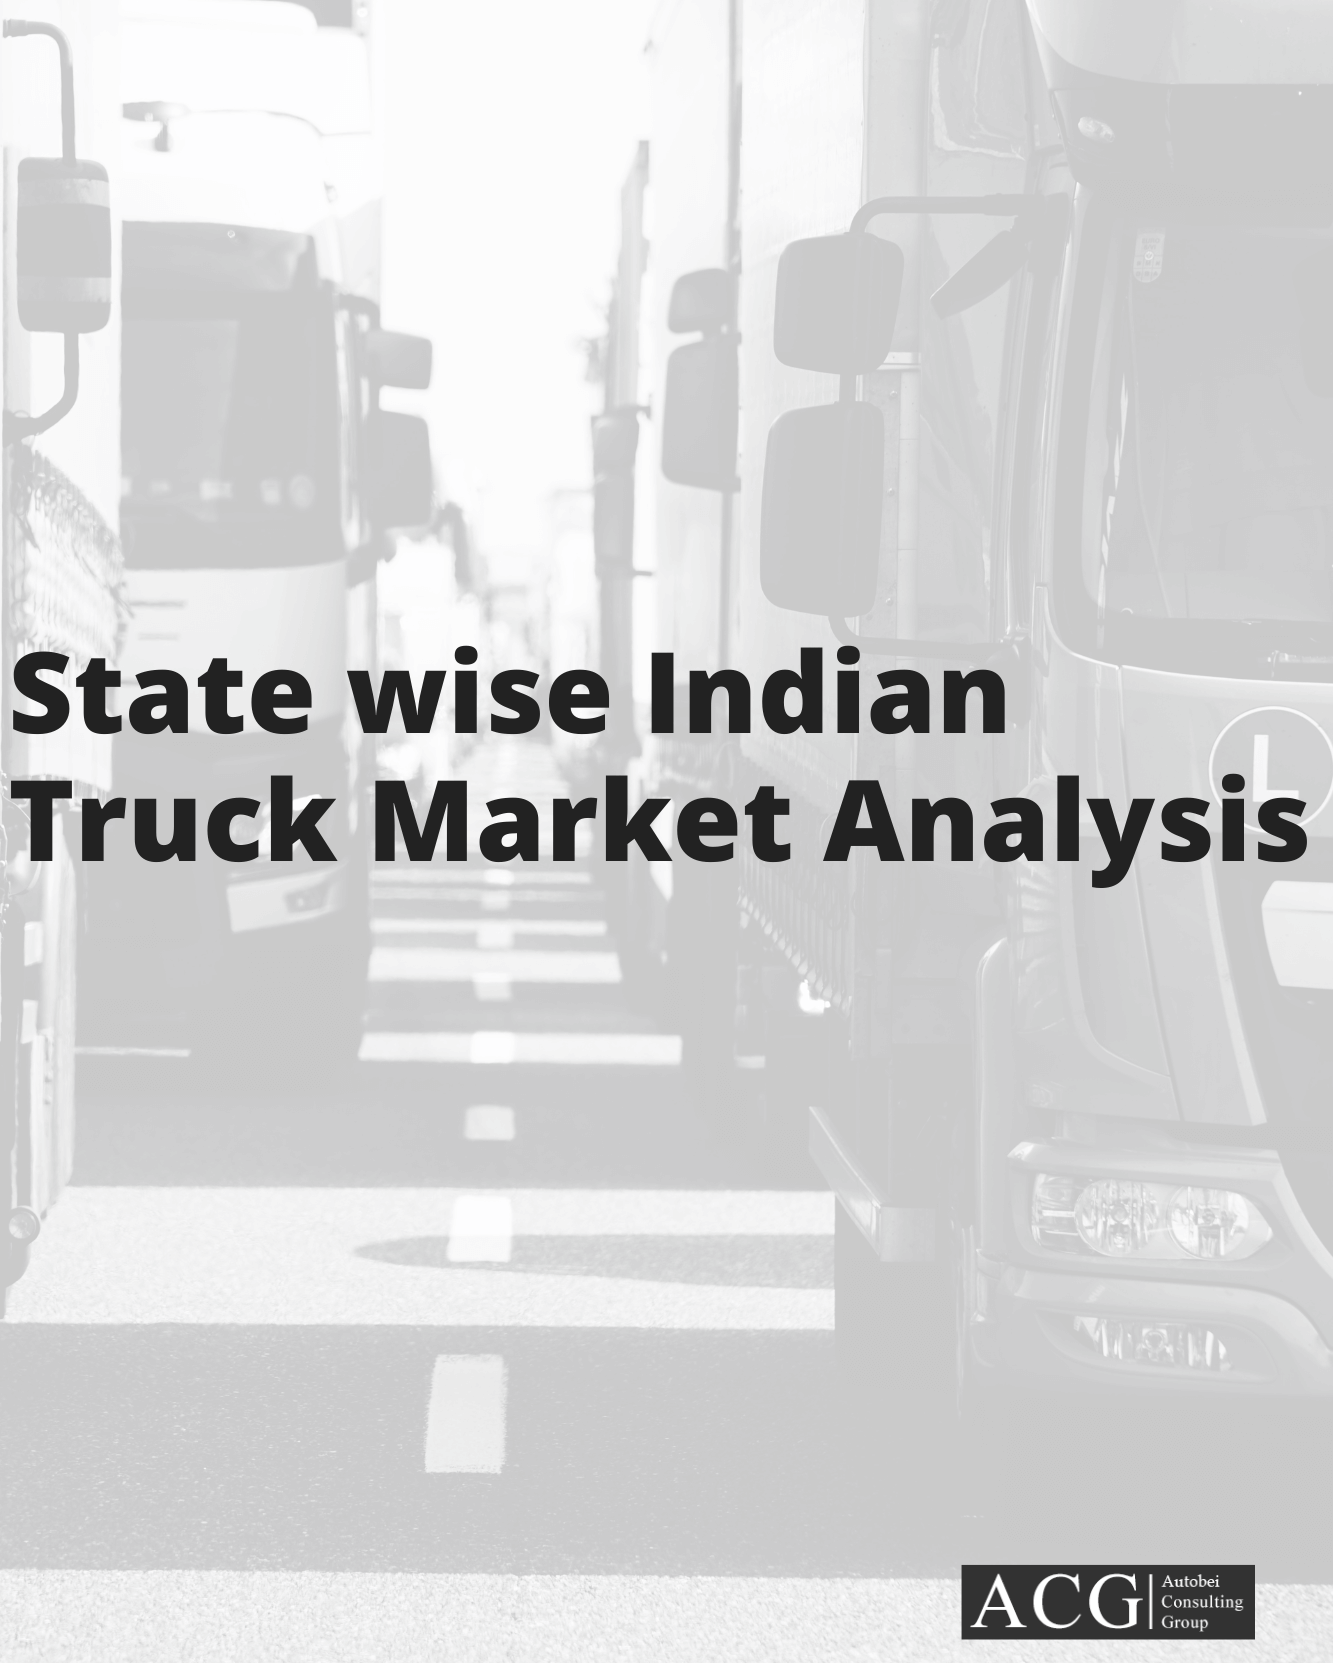 State wise Indian Truck Market Analysis report